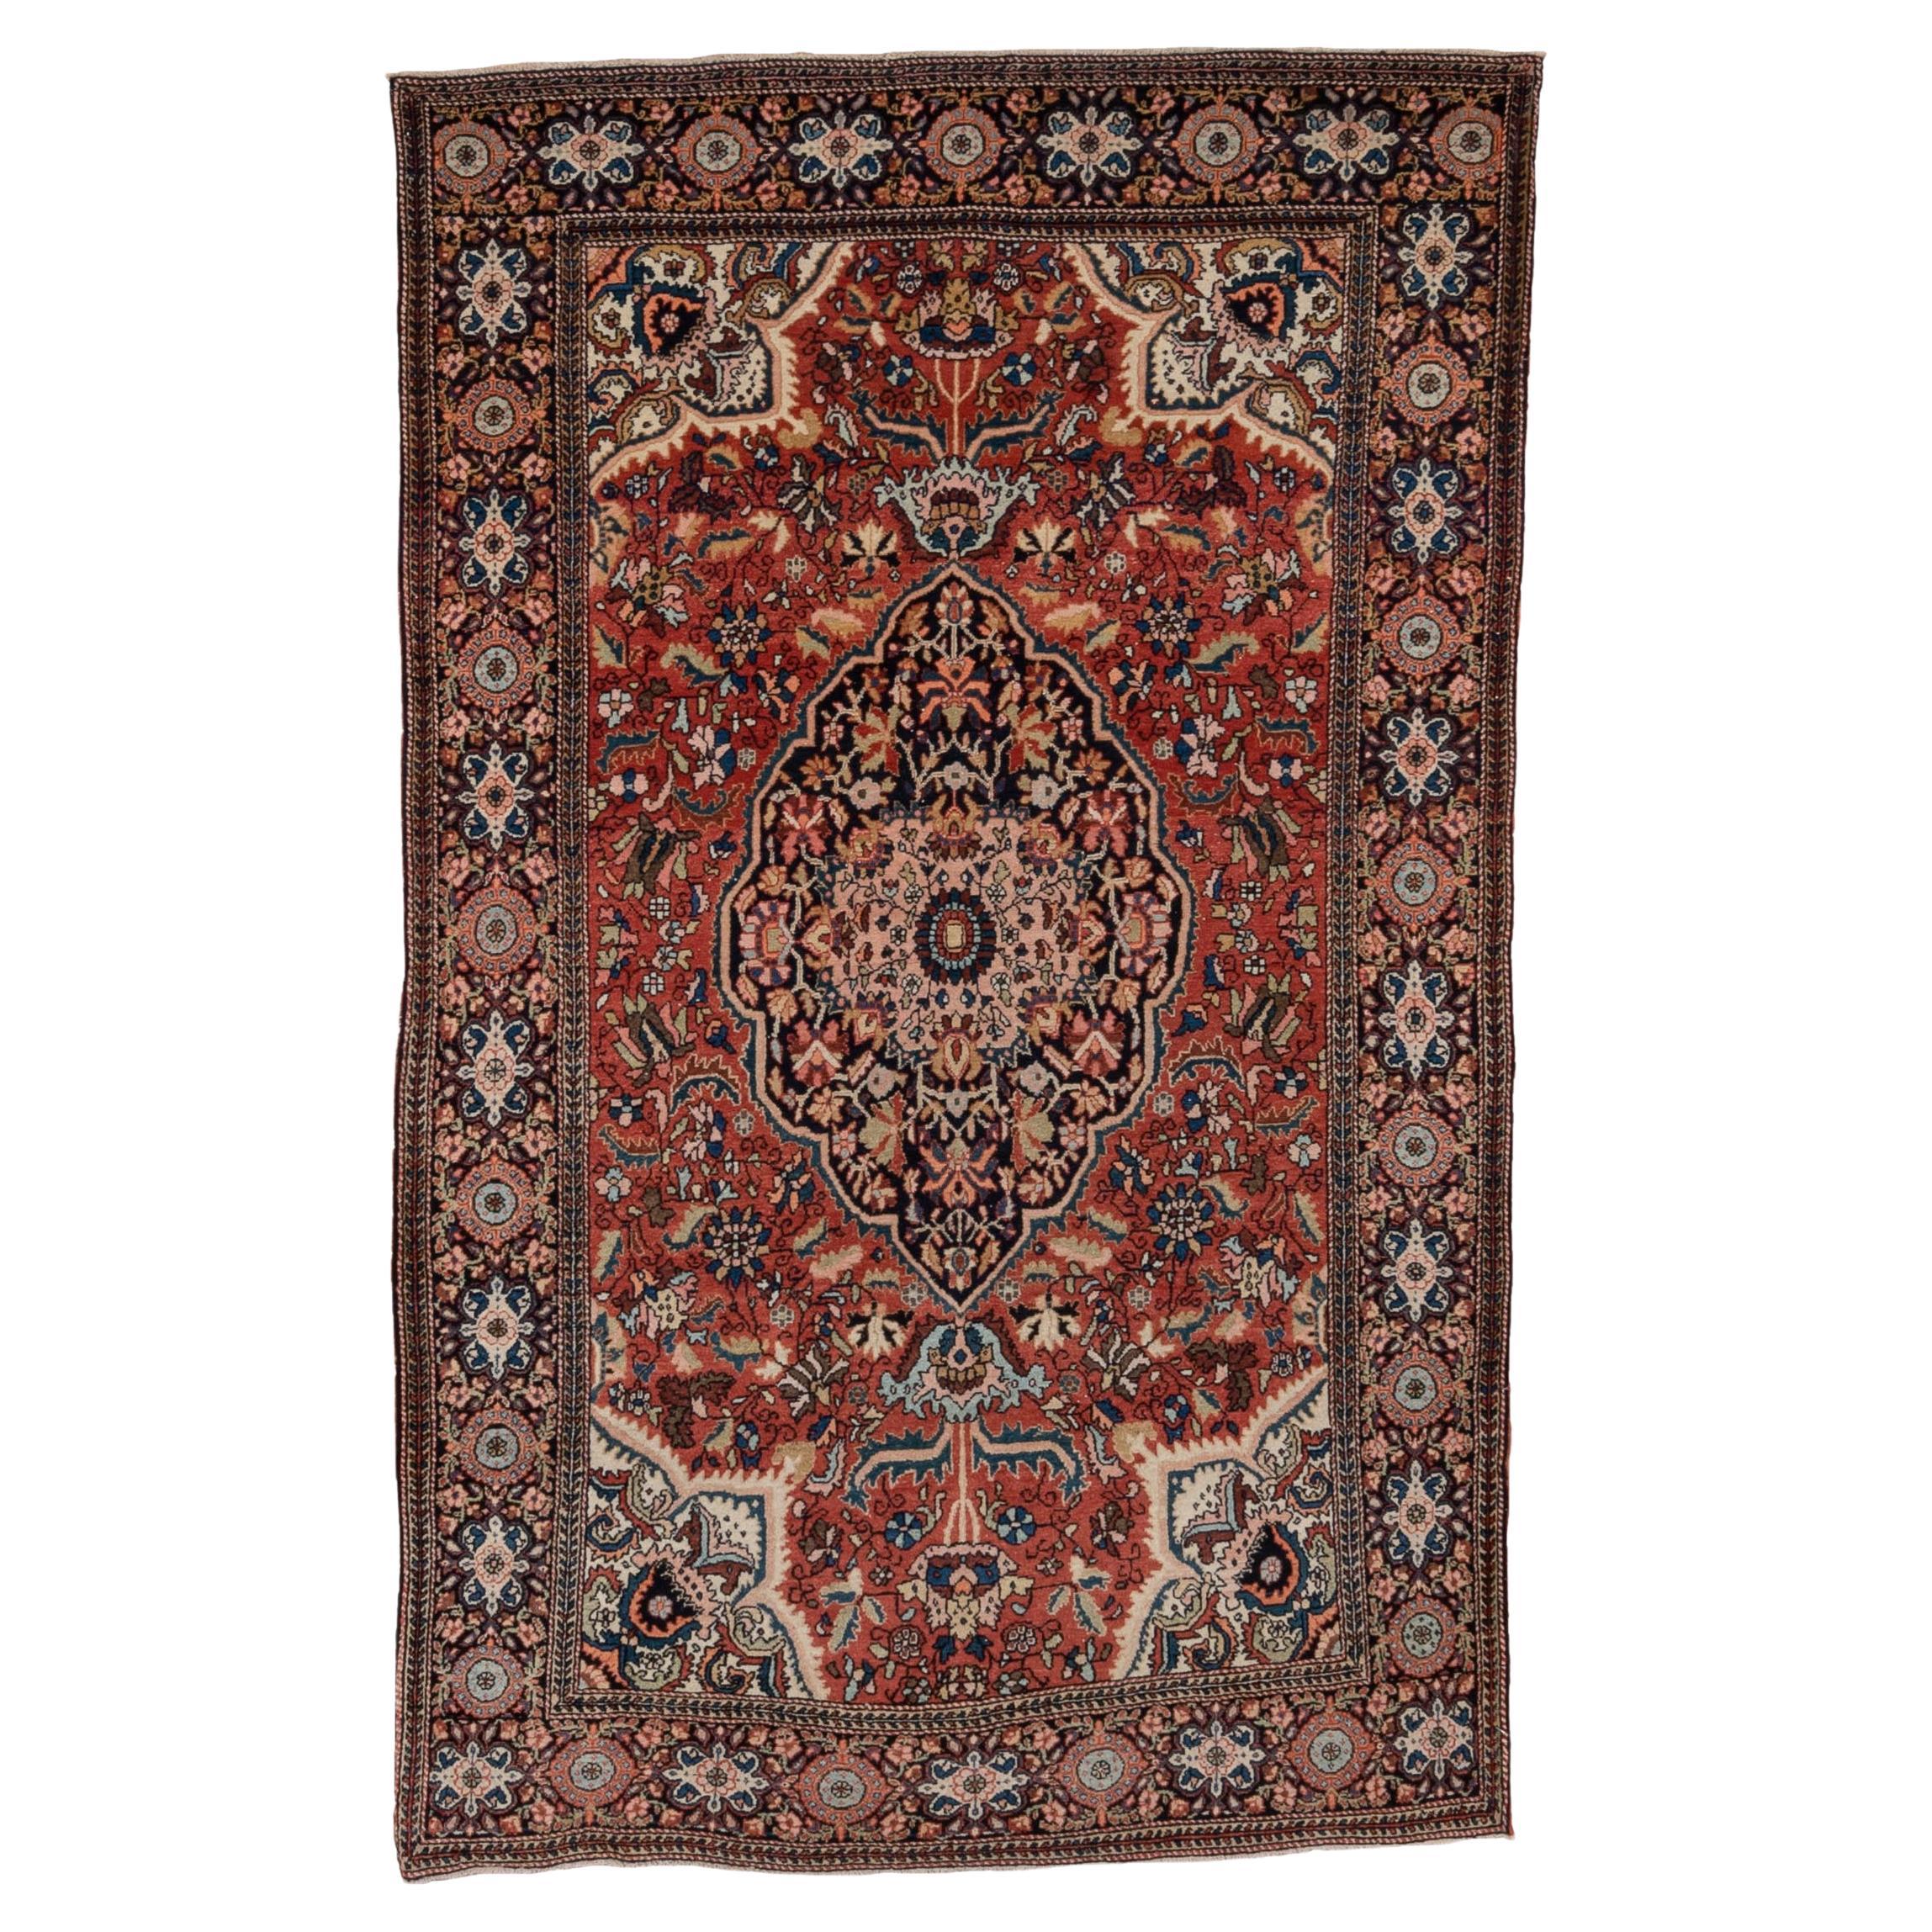 Far Sarouk Central Medallion in Bold Red with Ornate Persian Inspired Detailing